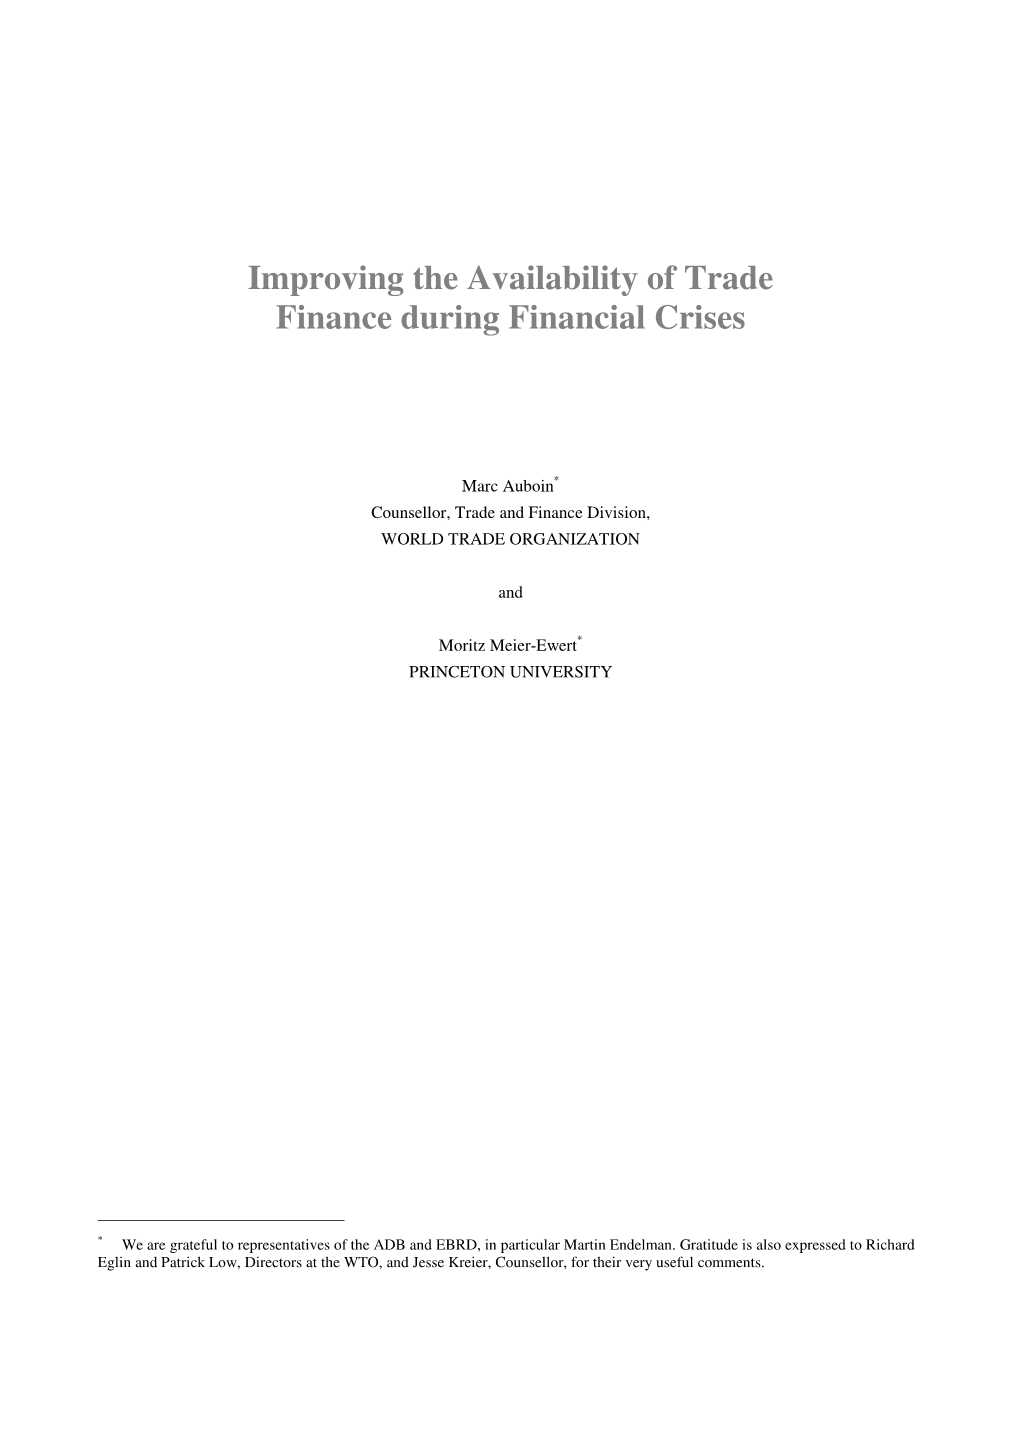 Improving the Availability of Trade Finance During Financial Crises